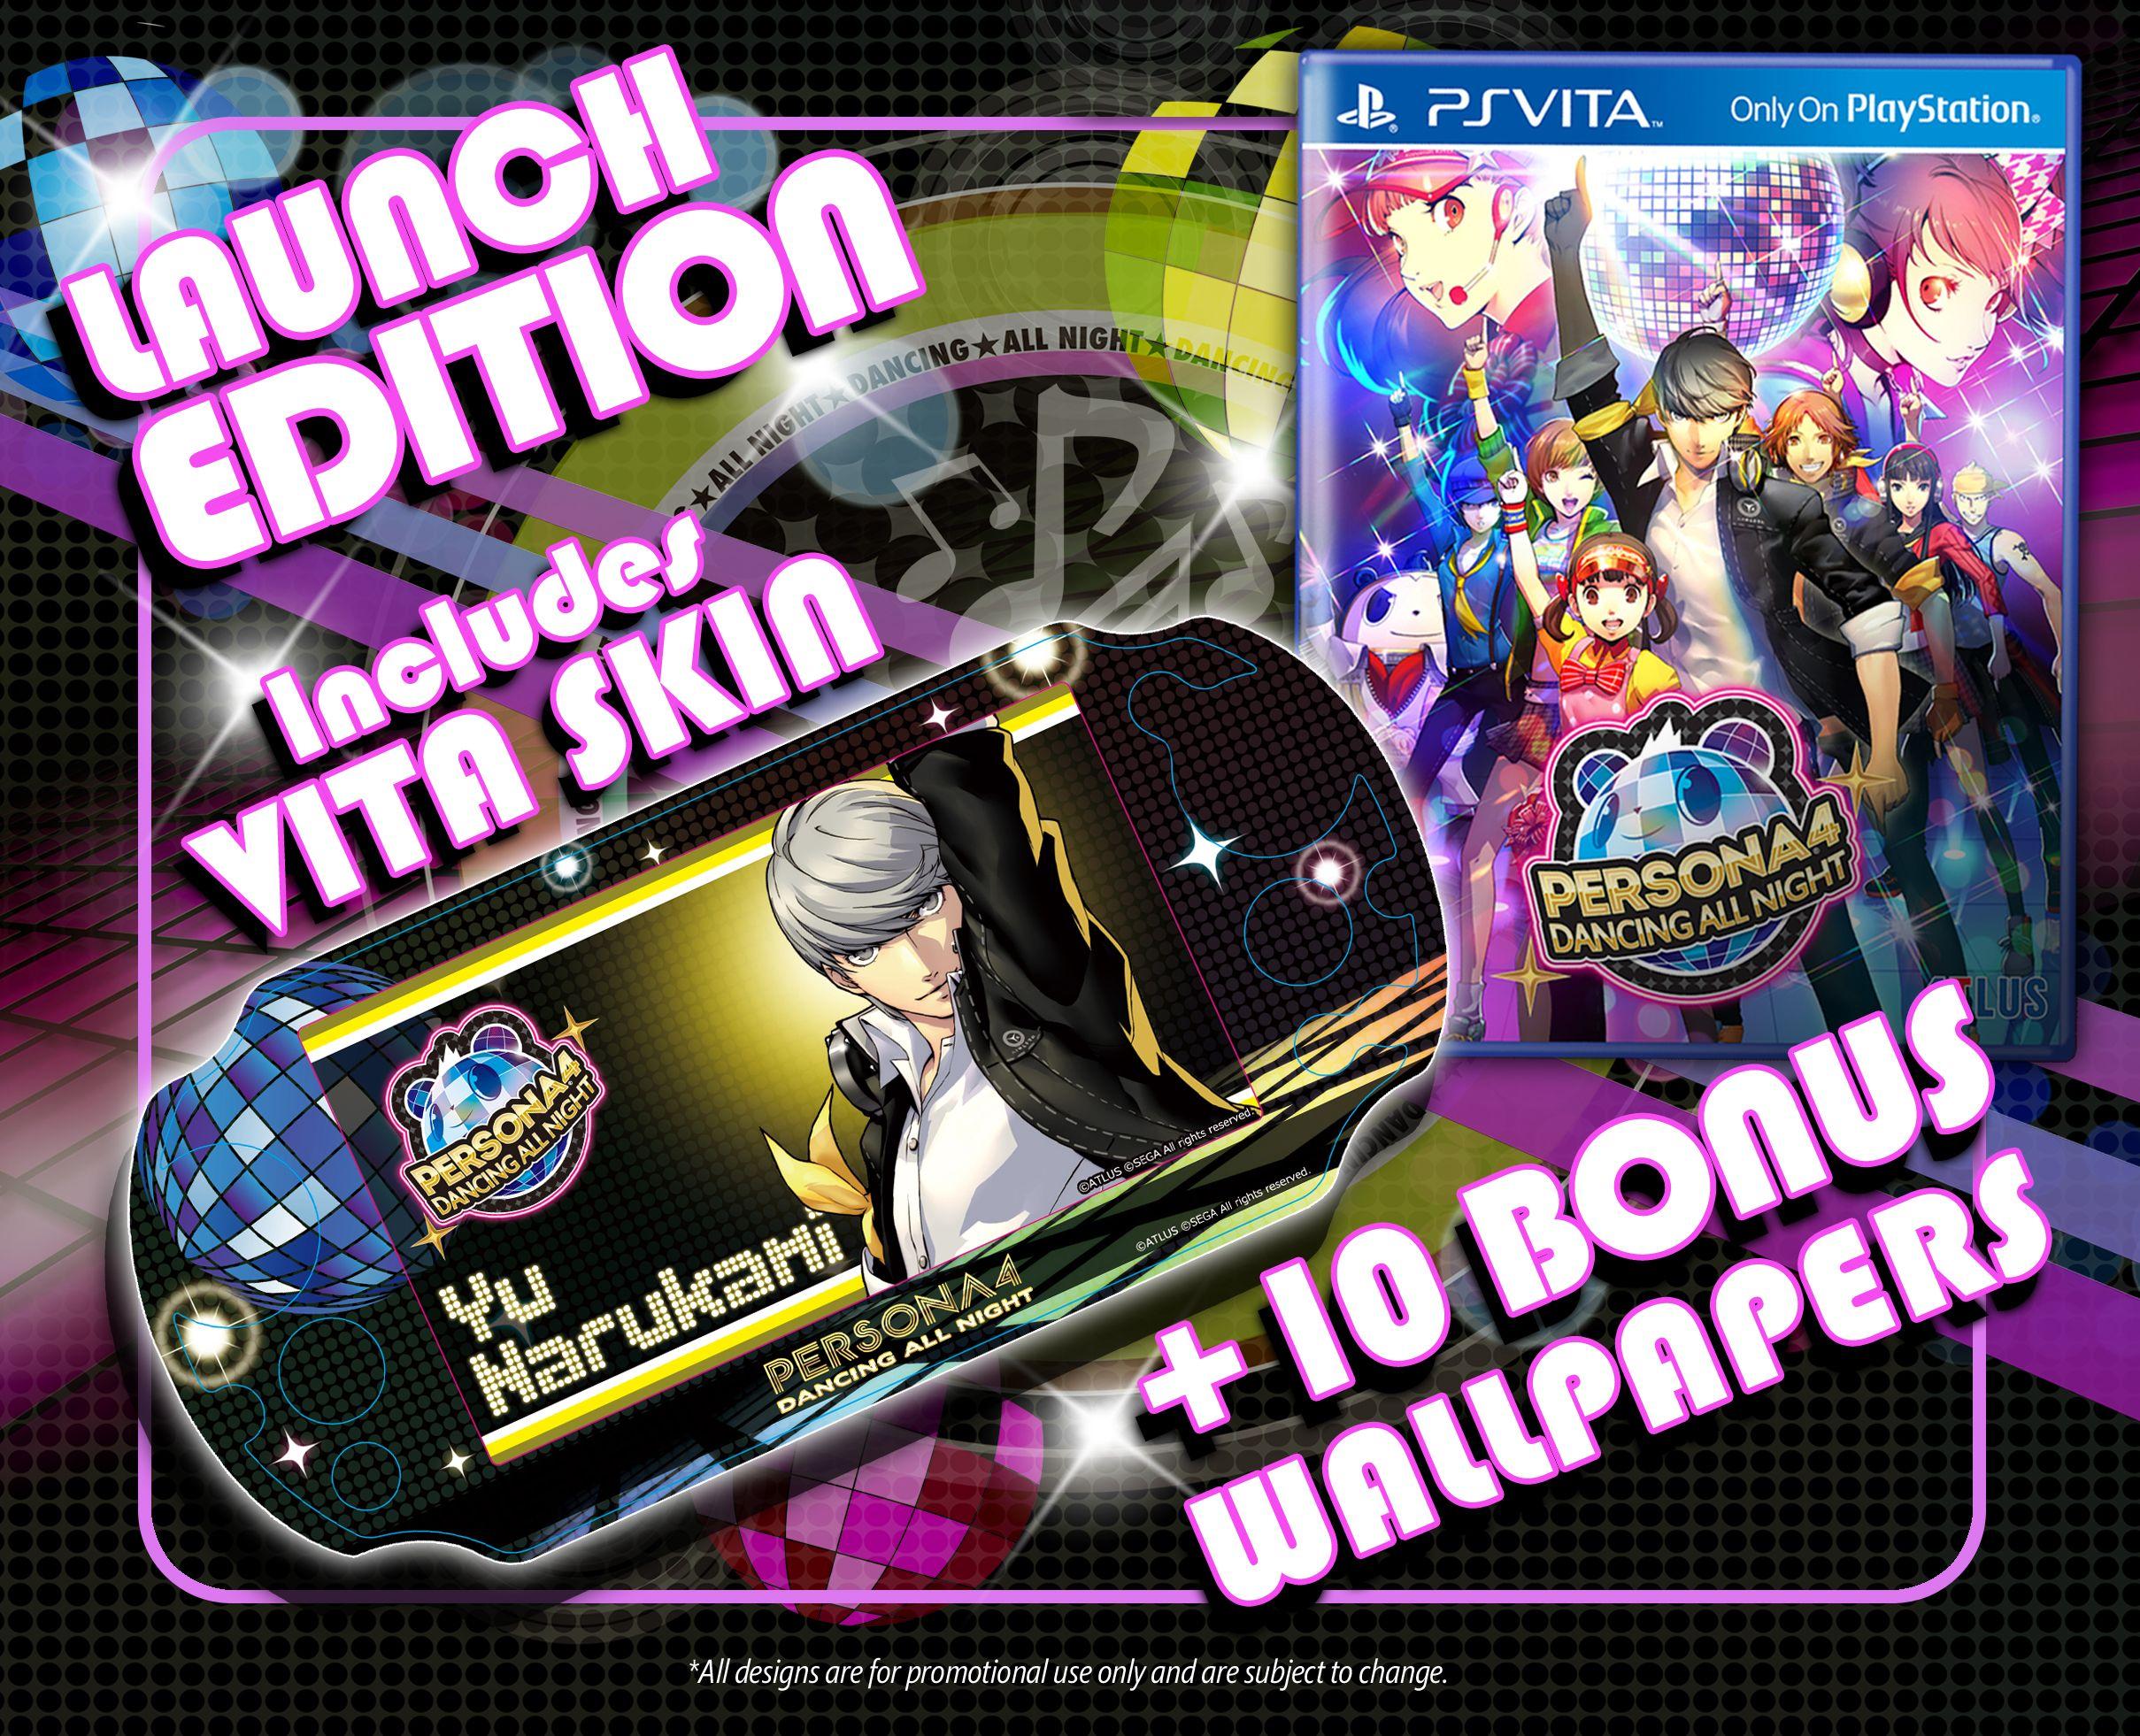 Check Out Persona 4: Dancing All Night's Disco Fever Edition